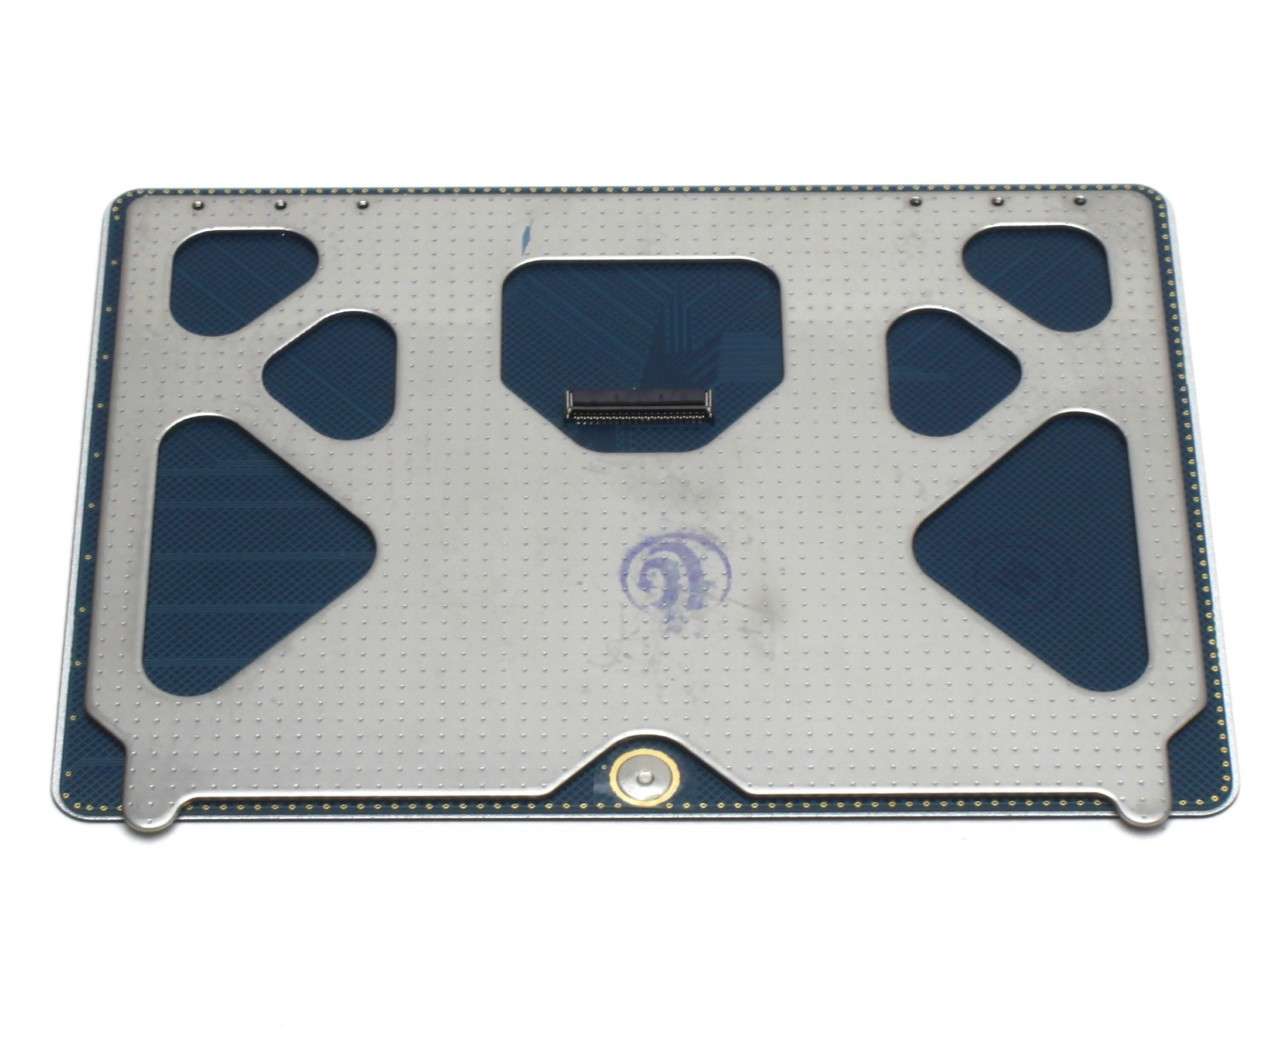 Touchpad Apple Macbook Pro Unibody 13 A1278 Late 2011 Trackpad image0